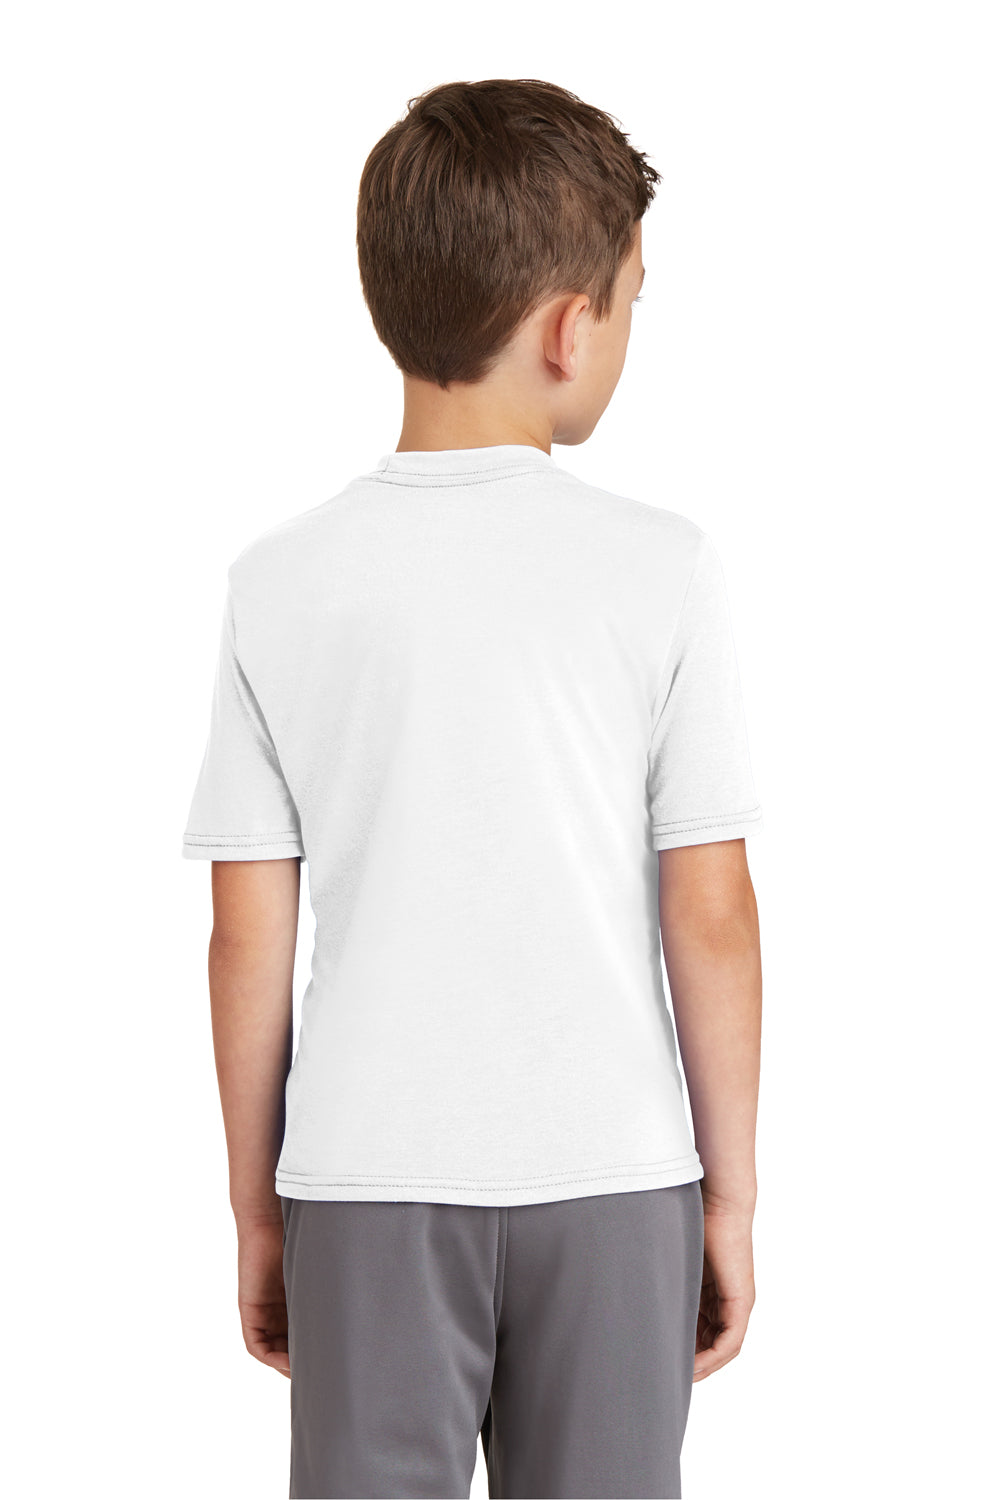 Port & Company PC381Y Youth Dry Zone Performance Moisture Wicking Short Sleeve Crewneck T-Shirt White Back